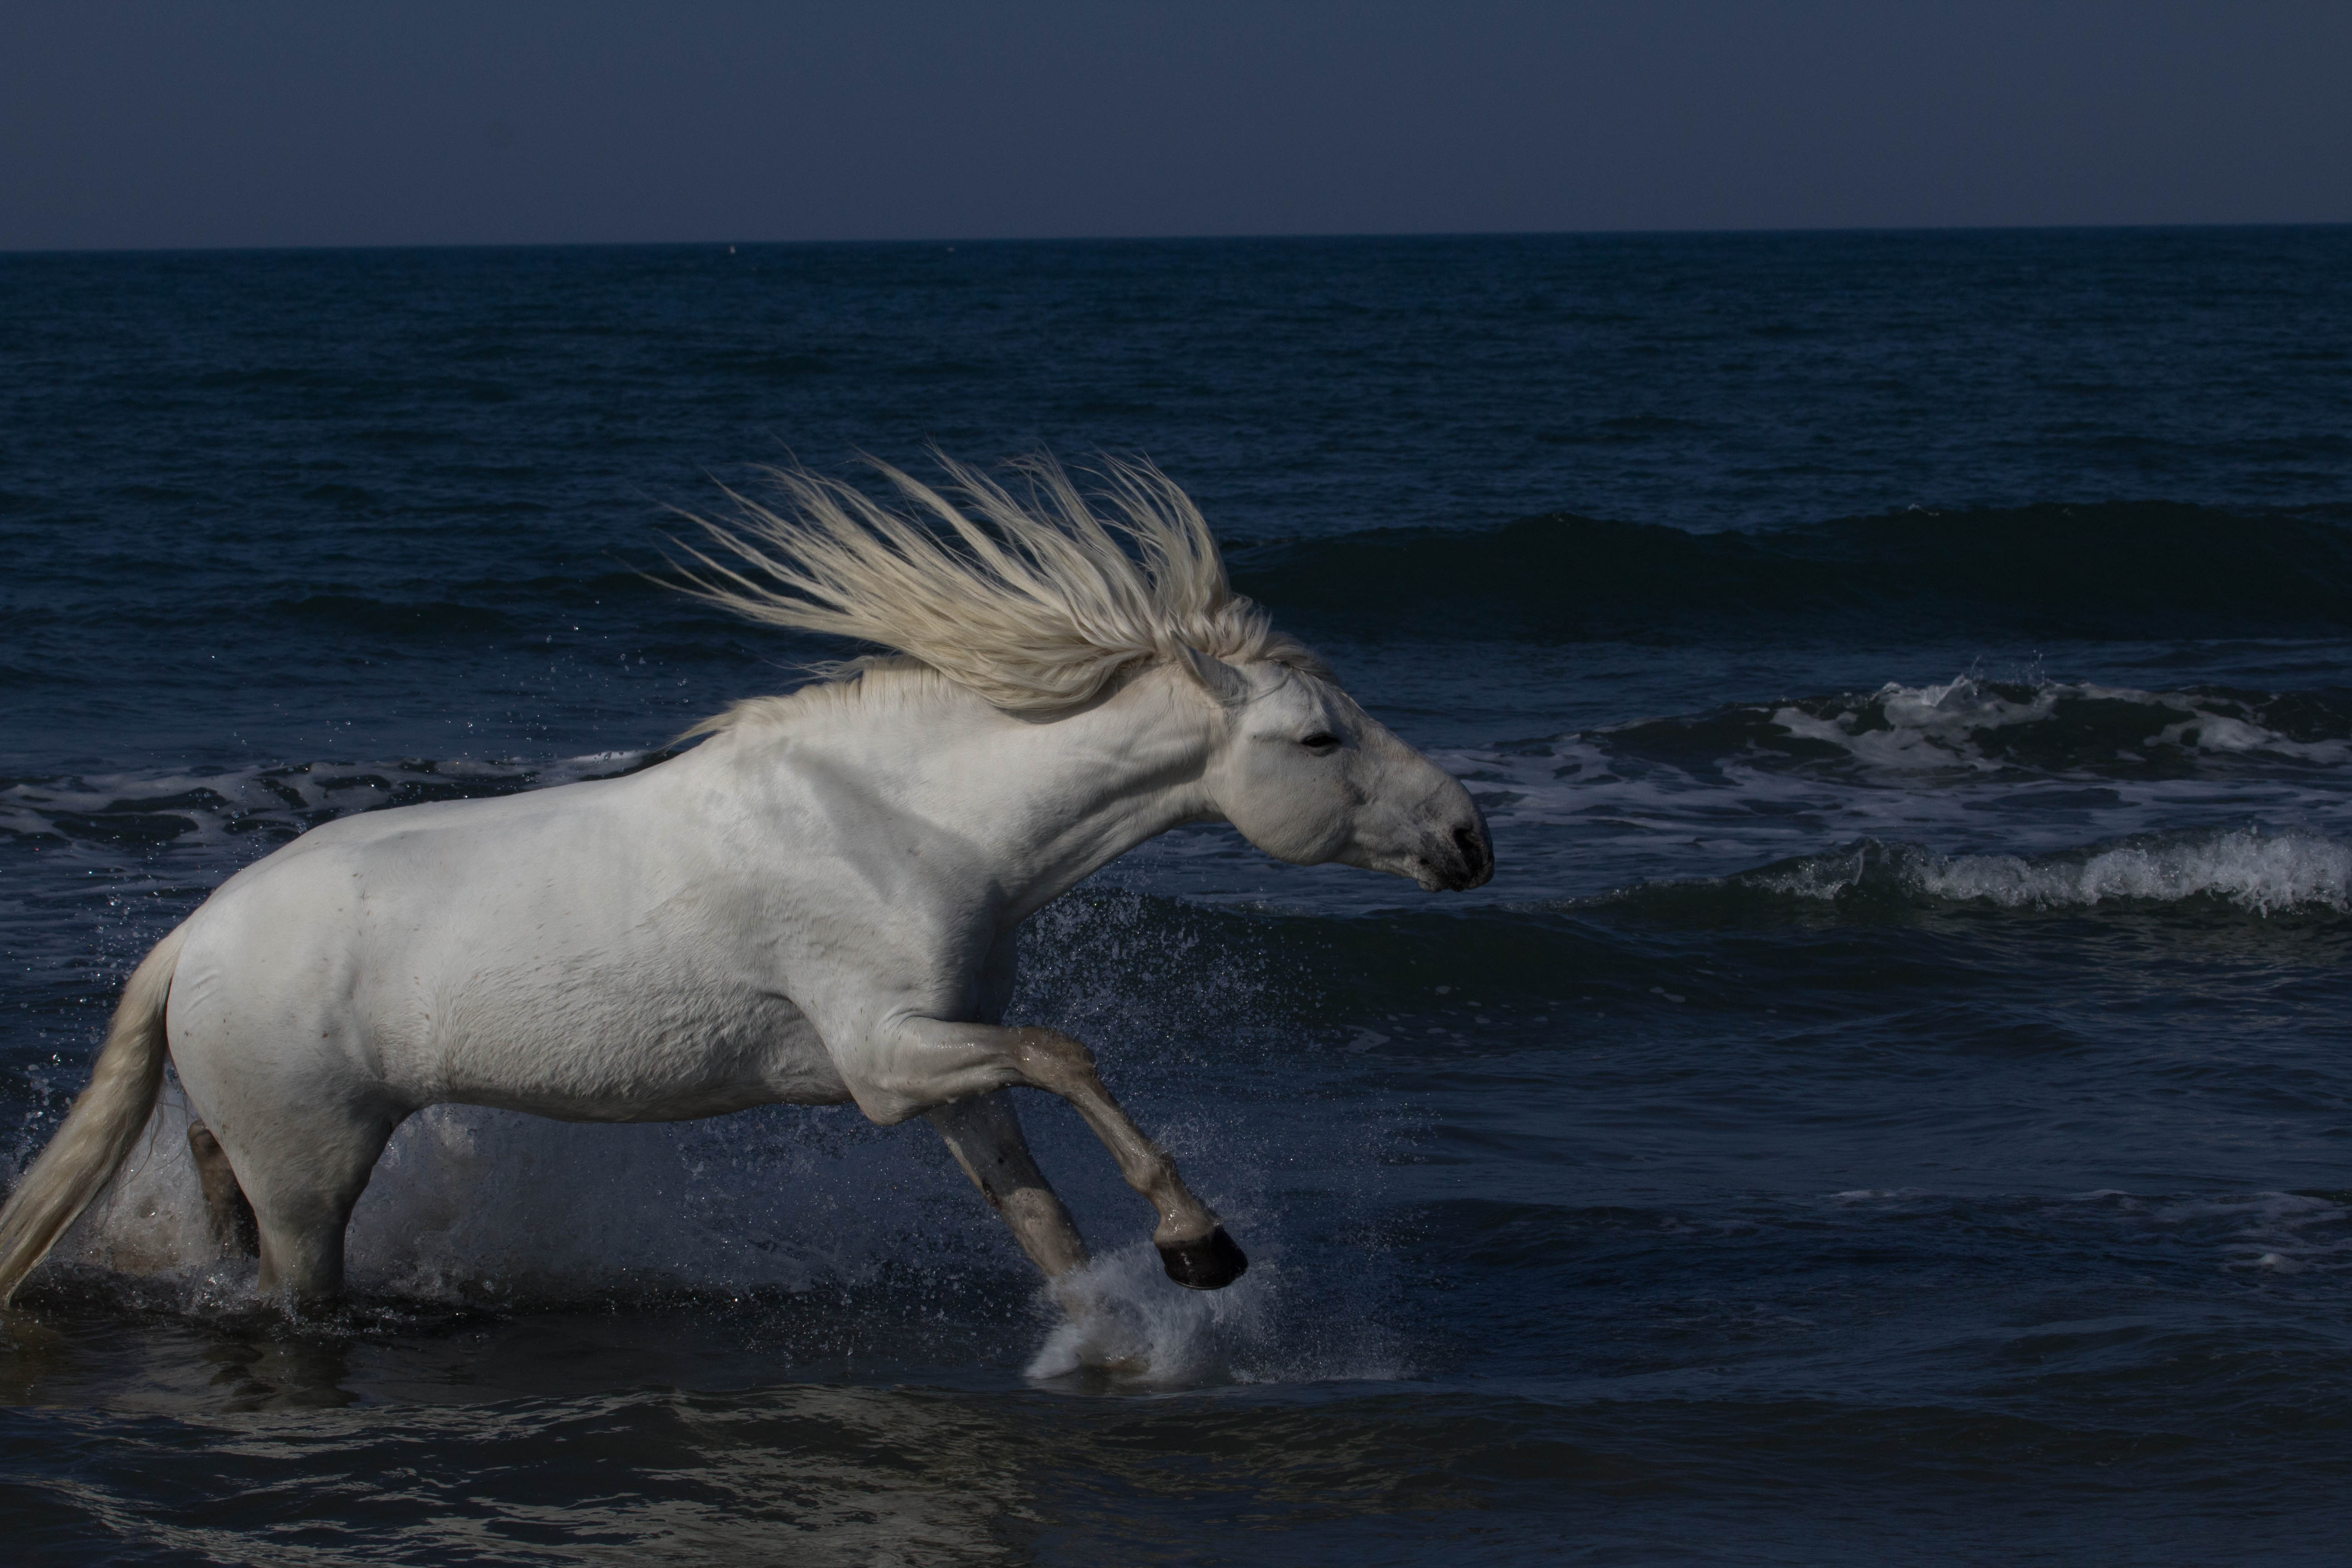 This photograph was taken in the picturesque Camargue region of southern France, the beautiful and stoic Camarguais horses often roam along the marshes of the wild terrain of the Mediterranean, where the mighty Rhone empties its water. This wild Camarguais horse frolics in the water, his energy amplified with the motion of his long vertical pointed mane.